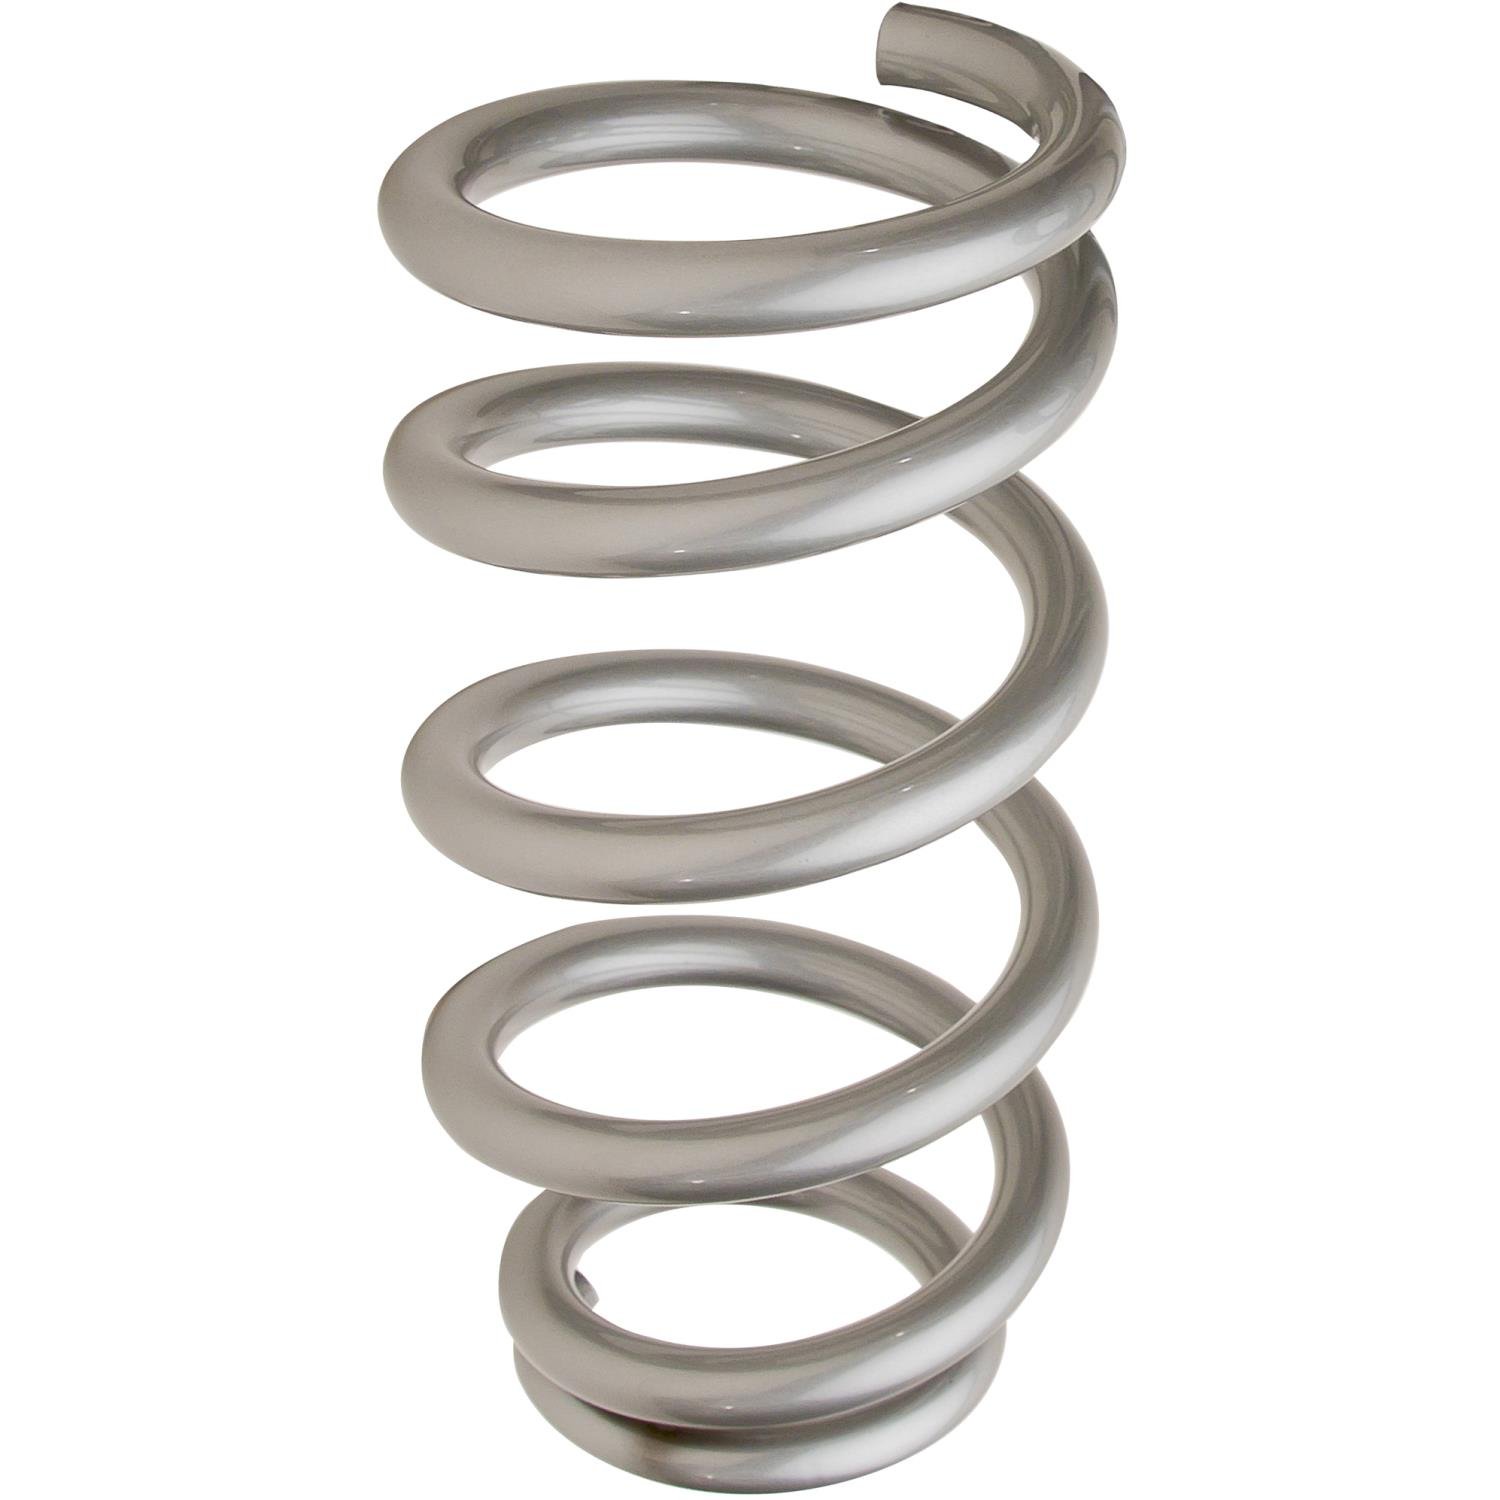 GM Style Flat & Ground Large High-Tensile Spring 11"